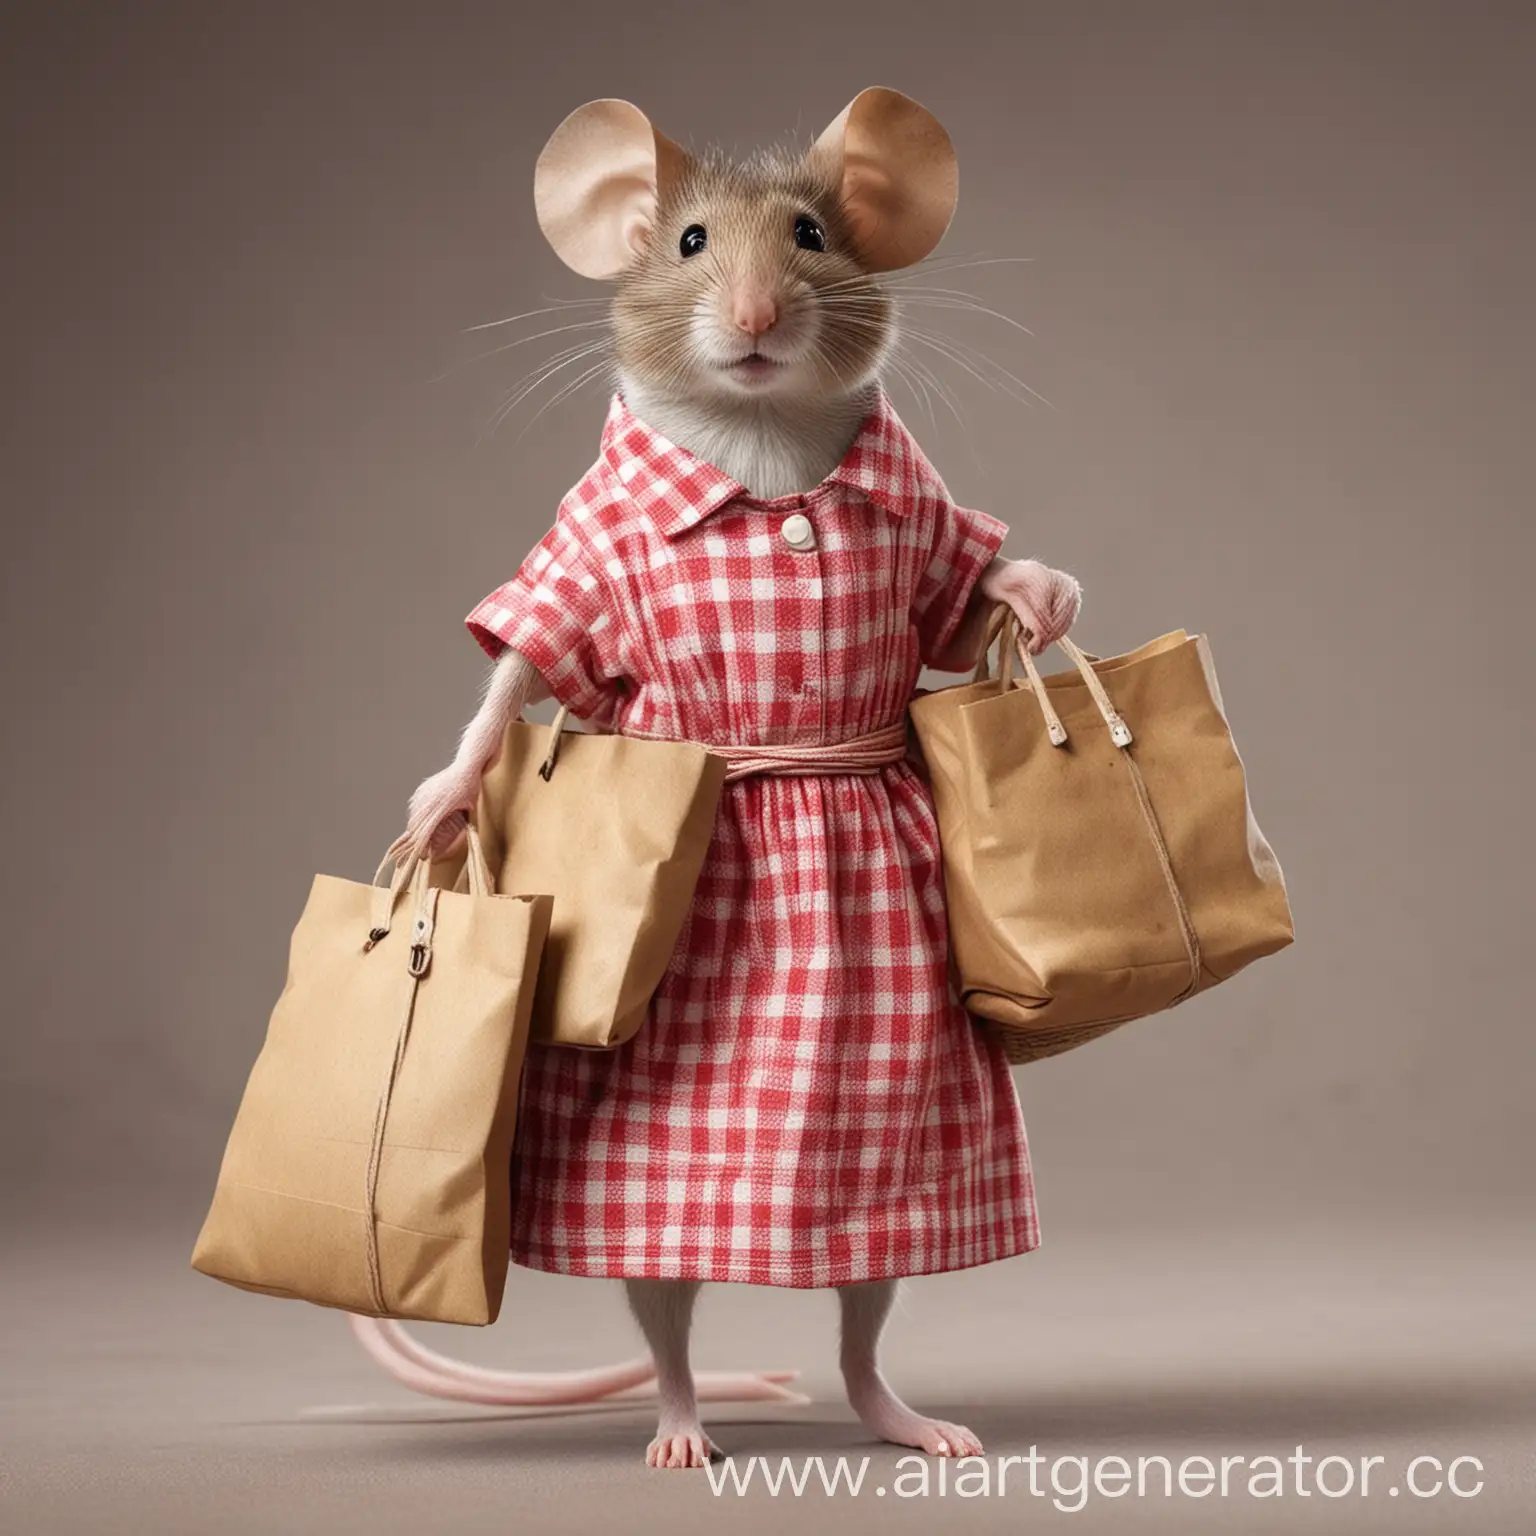 Adorable-Cargo-Mouse-Carrying-Bags-in-a-Stylish-Dress